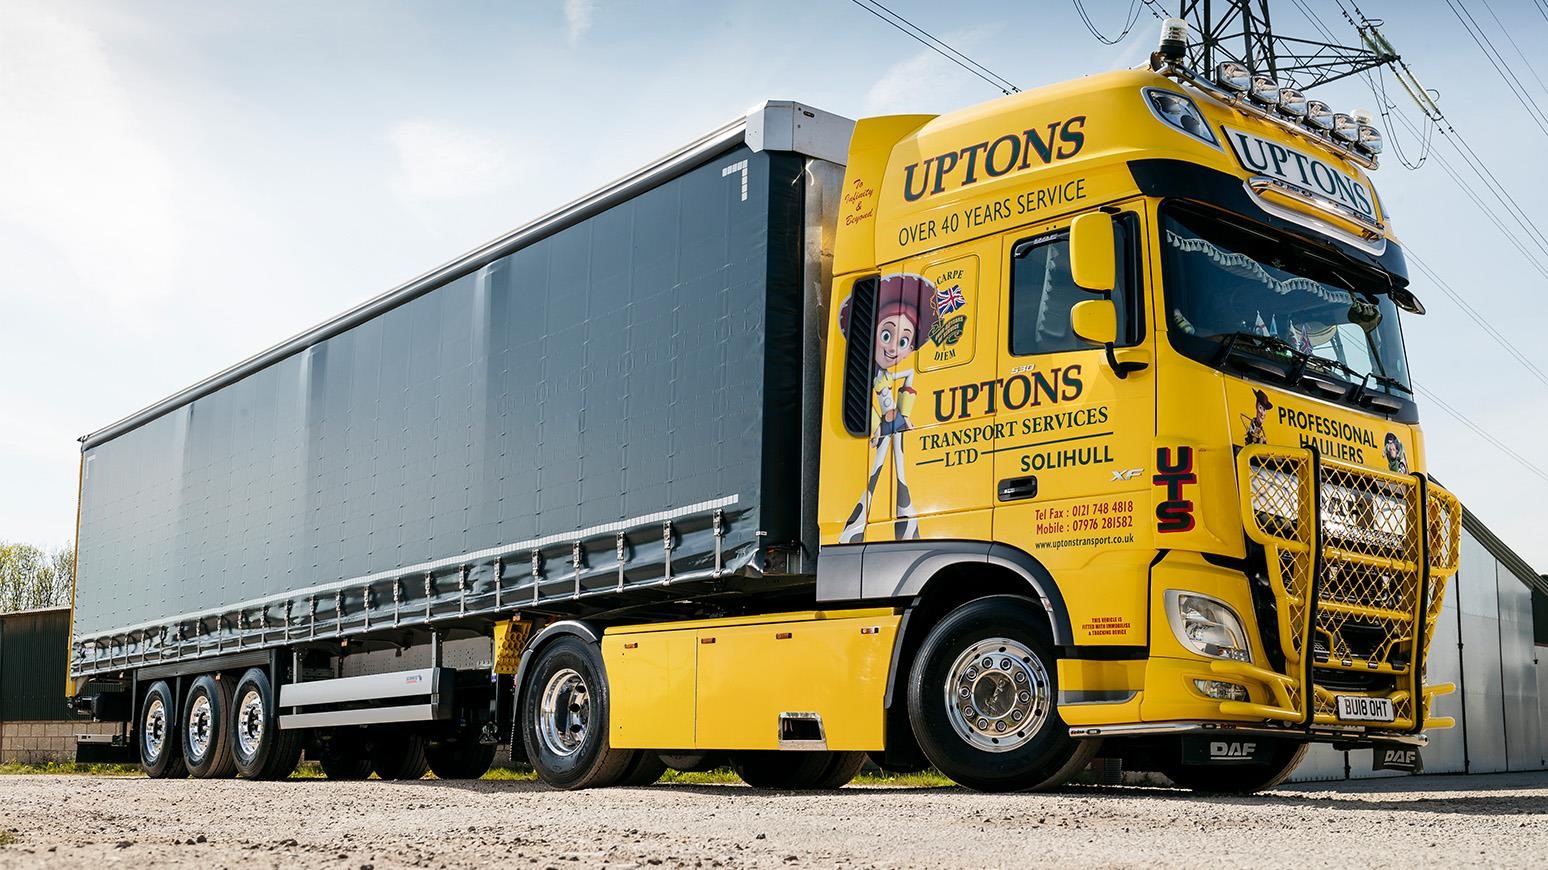 Schmitz Cargobull S.CS Fixed Roof Curtainsider Pulls More Than Its Weight For Uptons Transport Services